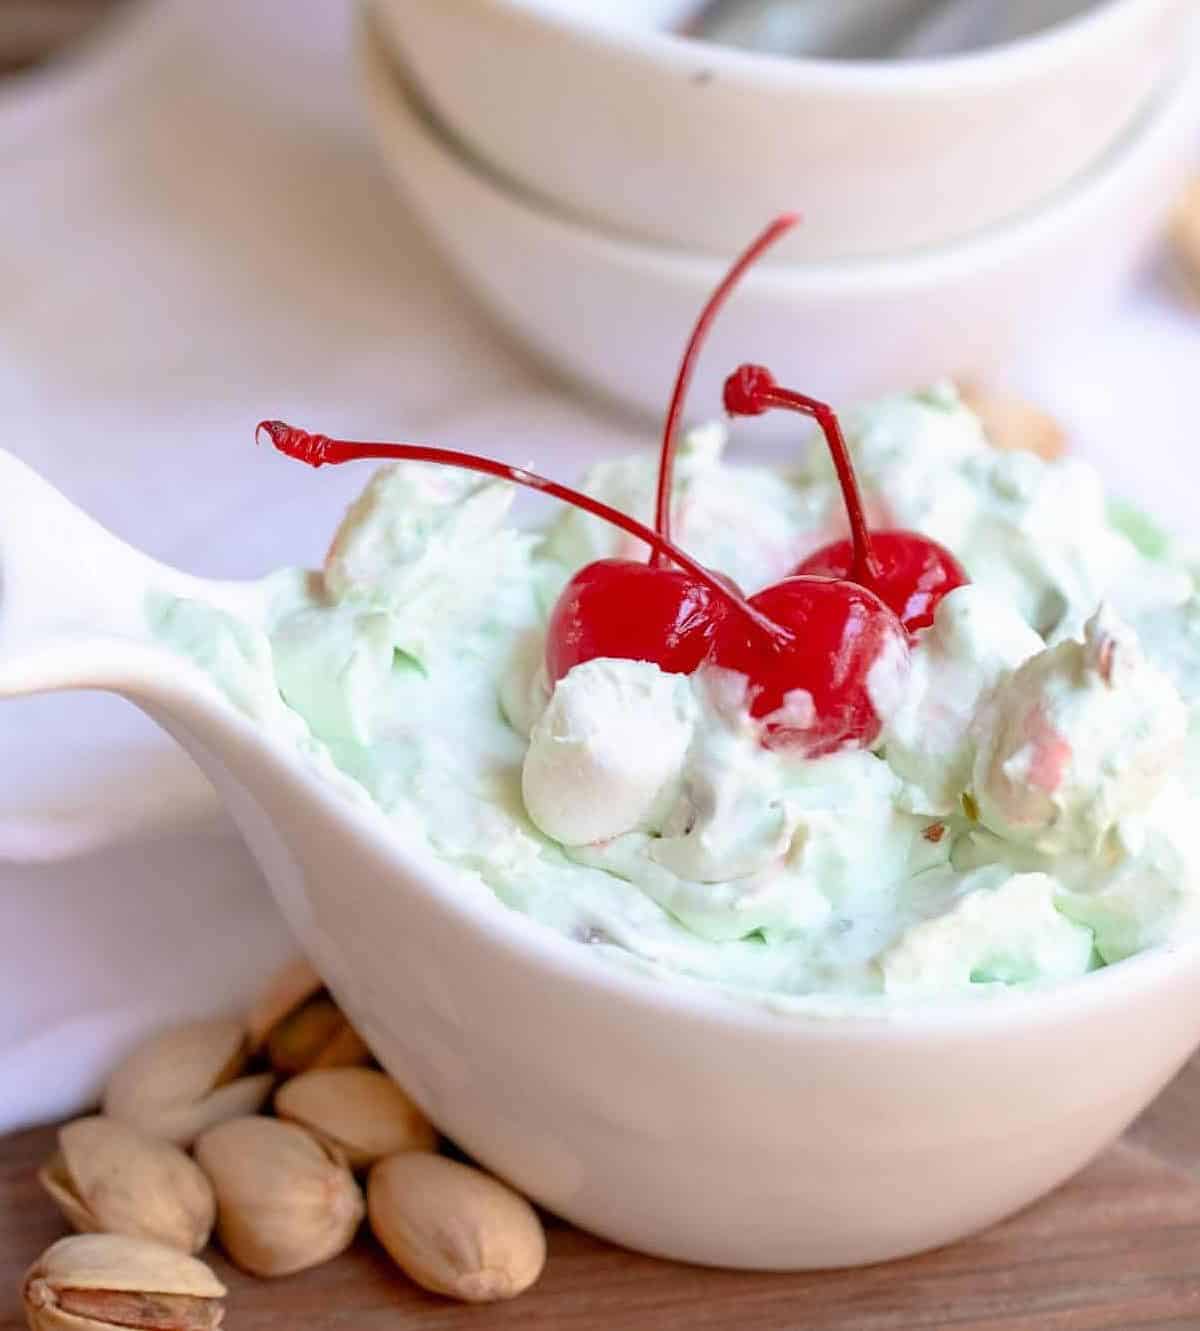  A spoonful of snowball salad with chunks of ripe bananas and nuts